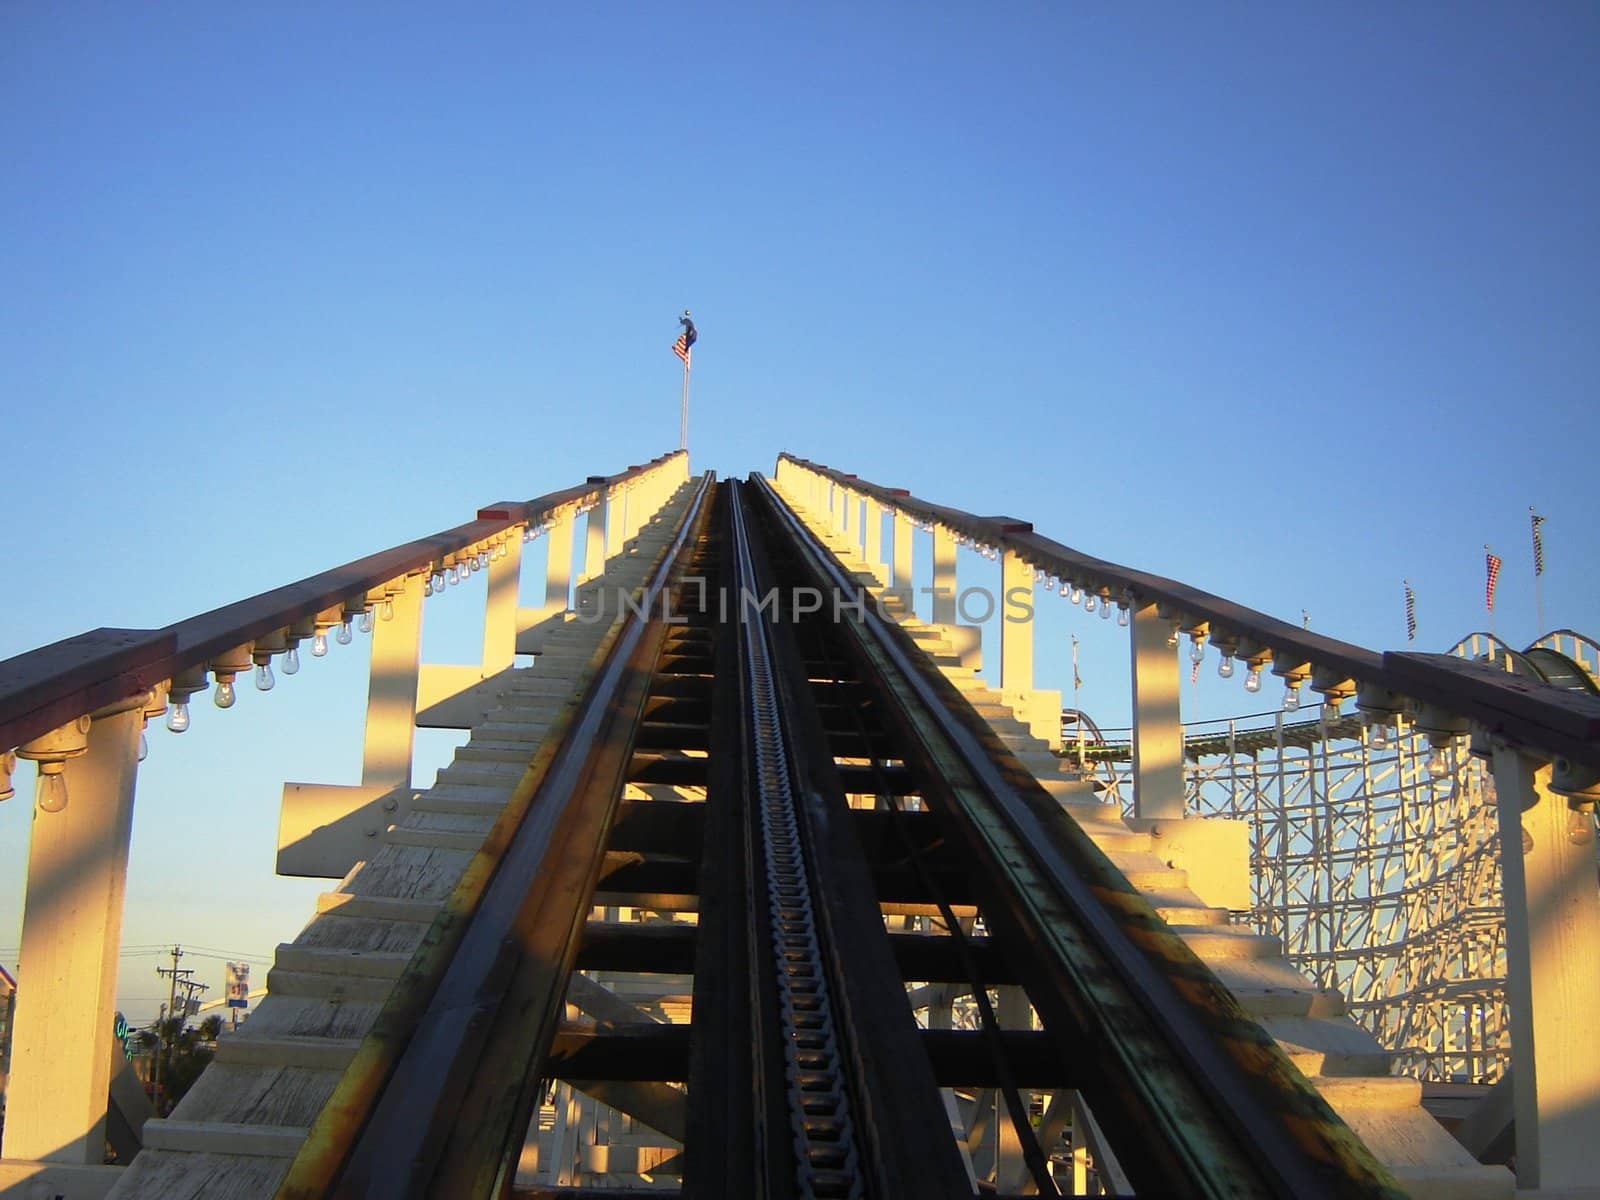 Roller Coaster by RefocusPhoto